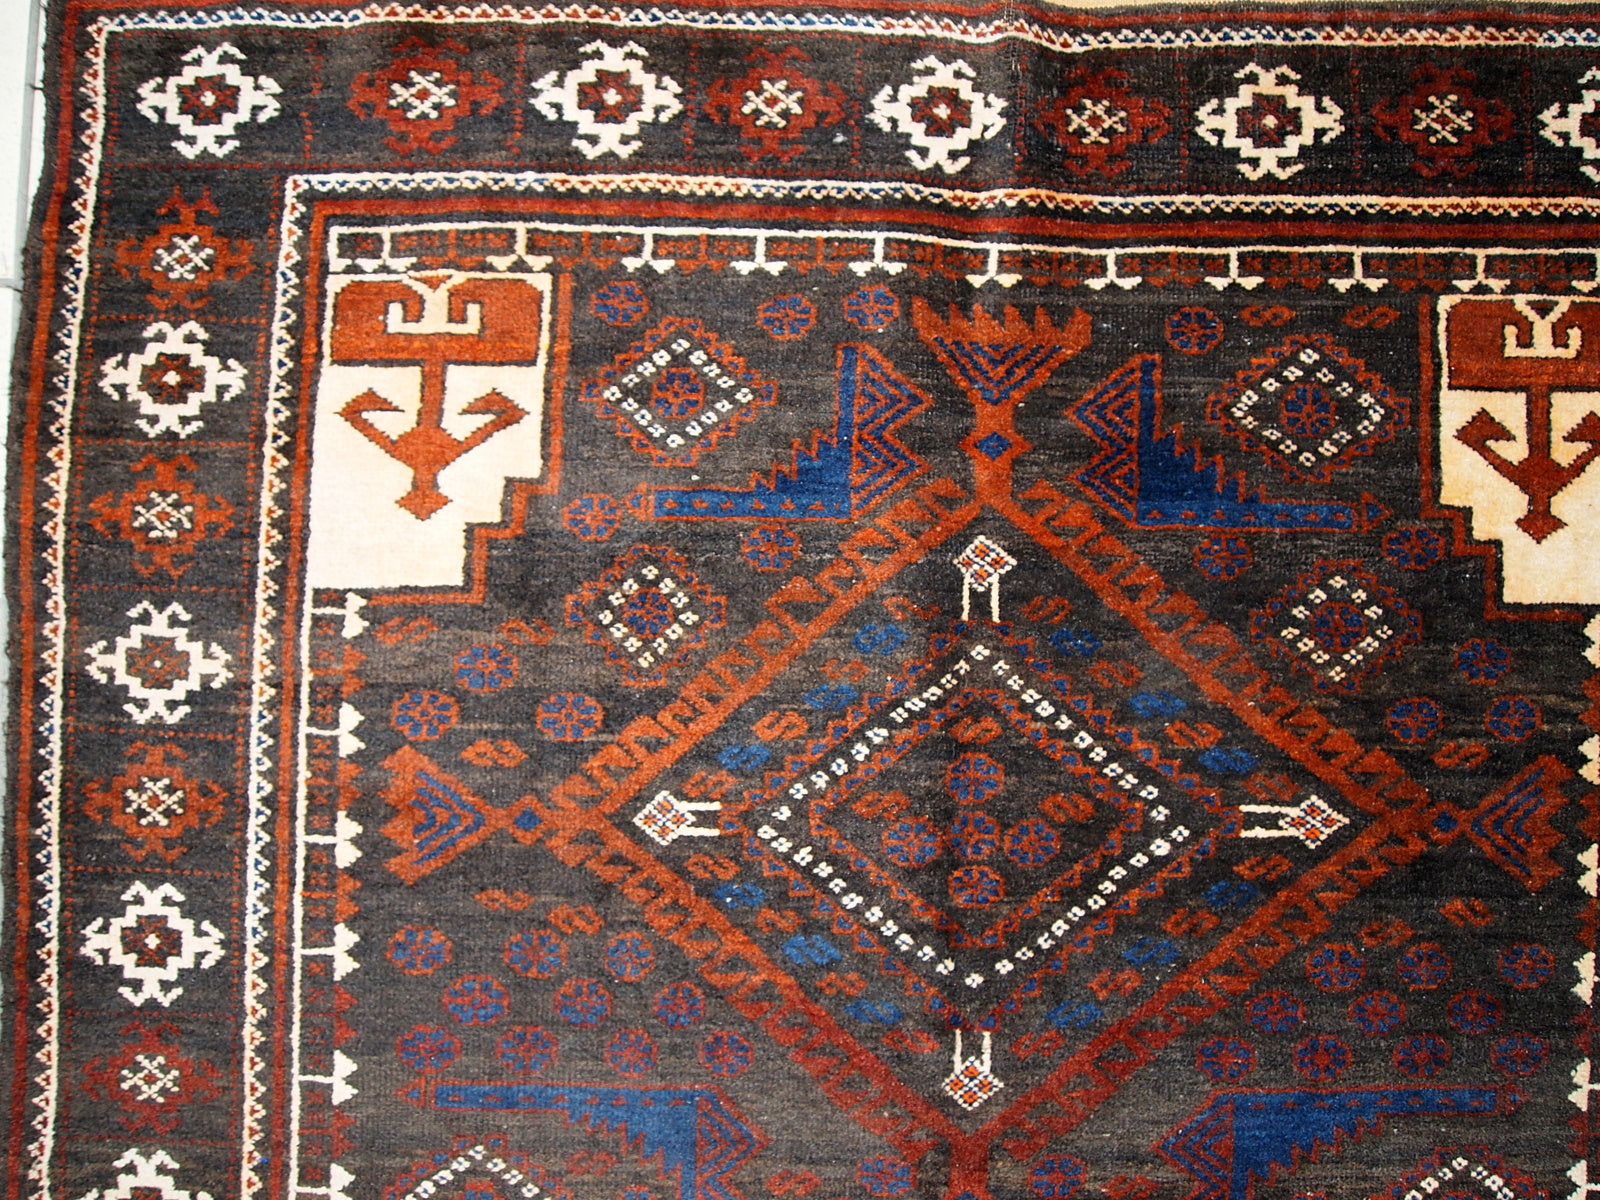 Detailed shot of white patterns and figures on the vintage Afghan rug.